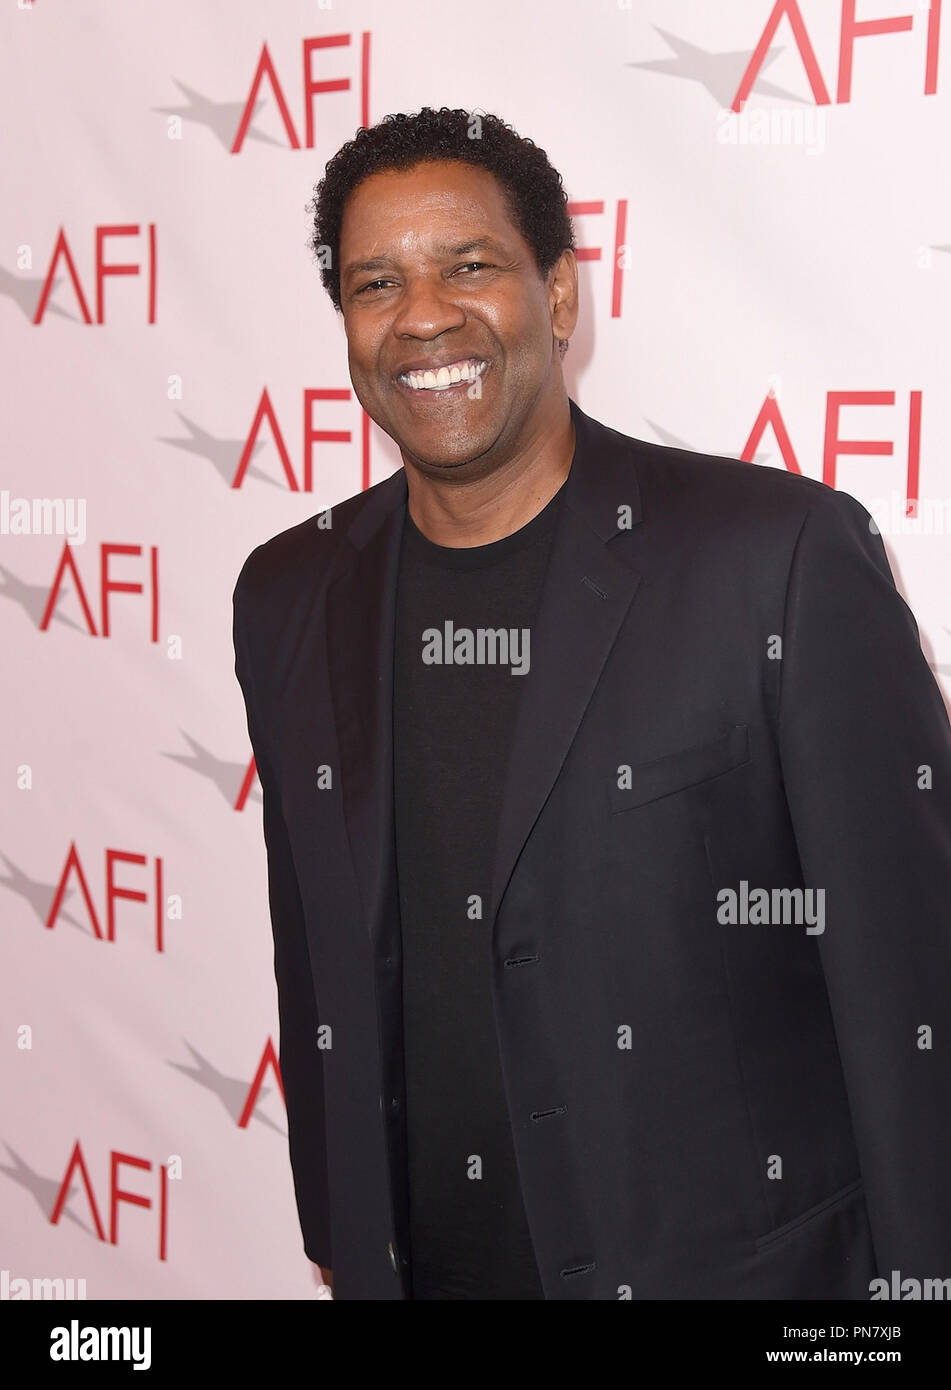 LOS ANGELES, CA - JANUARY 06:  Actor/director Denzel Washington attends the 17th annual AFI Awards at Four Seasons Los Angeles at Beverly Hills on January 6, 2017 in Los Angeles, California.  Photo: AFI Stock Photo